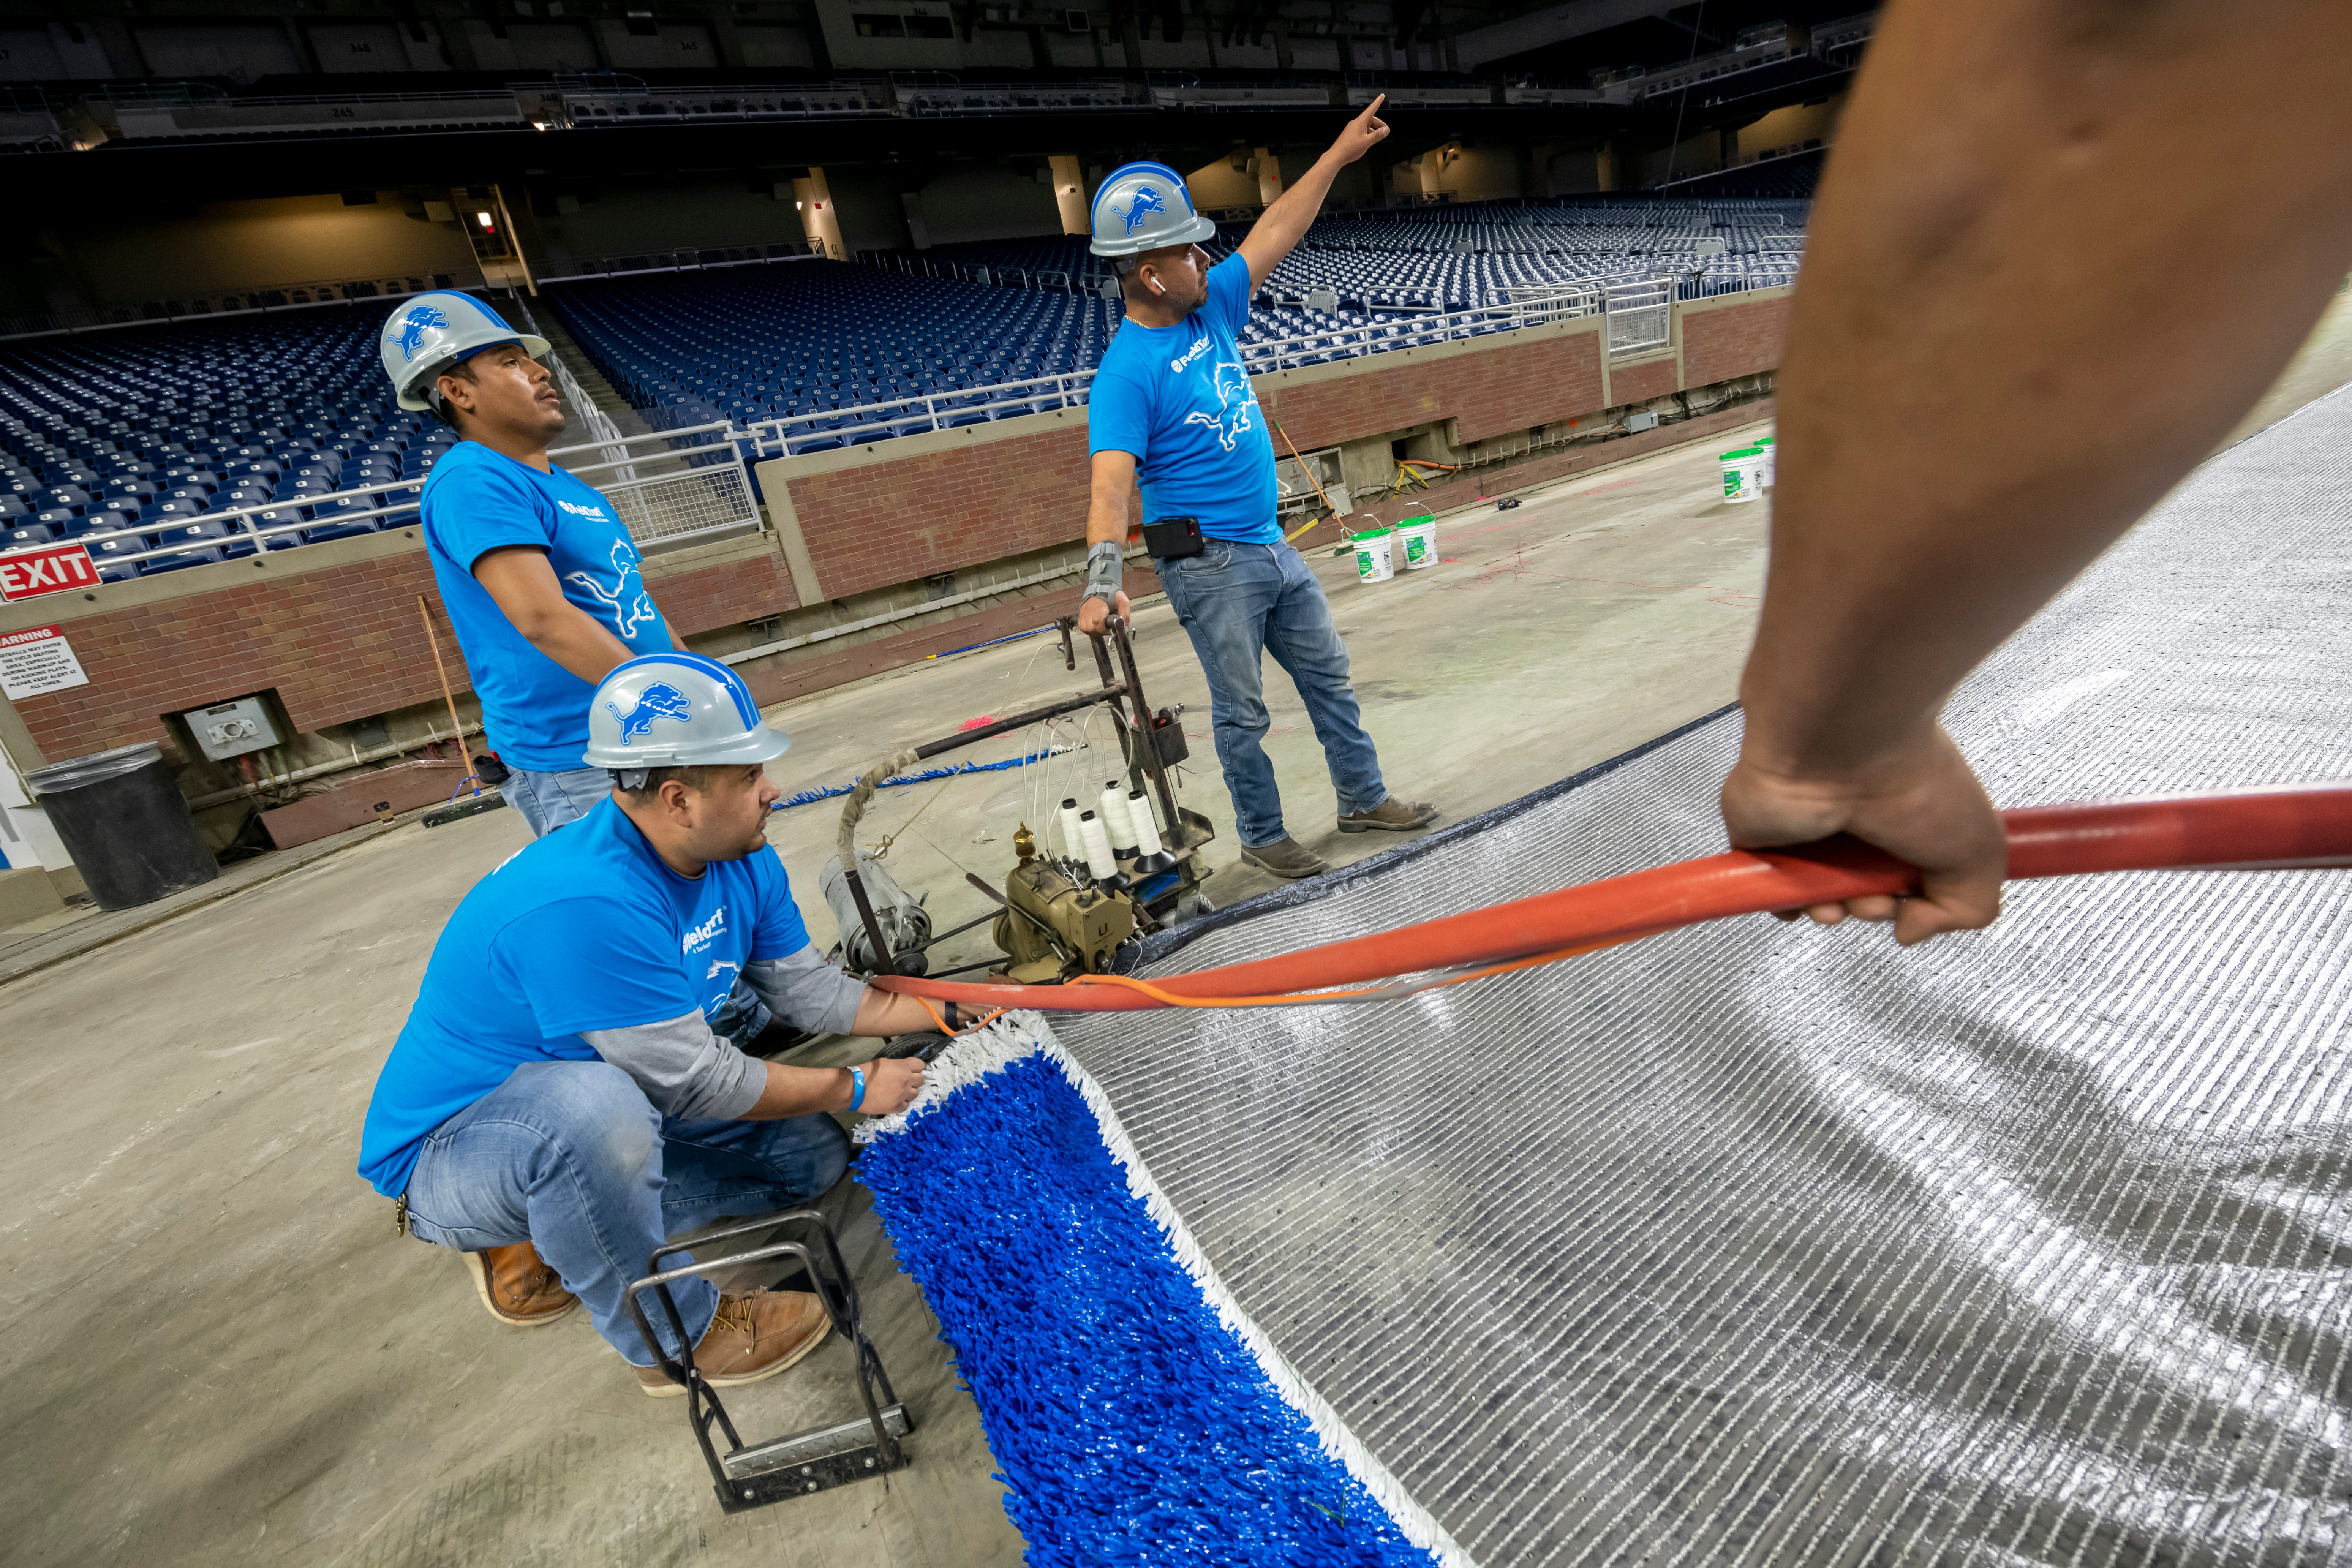 FieldTurf employees use an industrial sewing machine to connect two pieces of a new playing surface together at Ford Field.